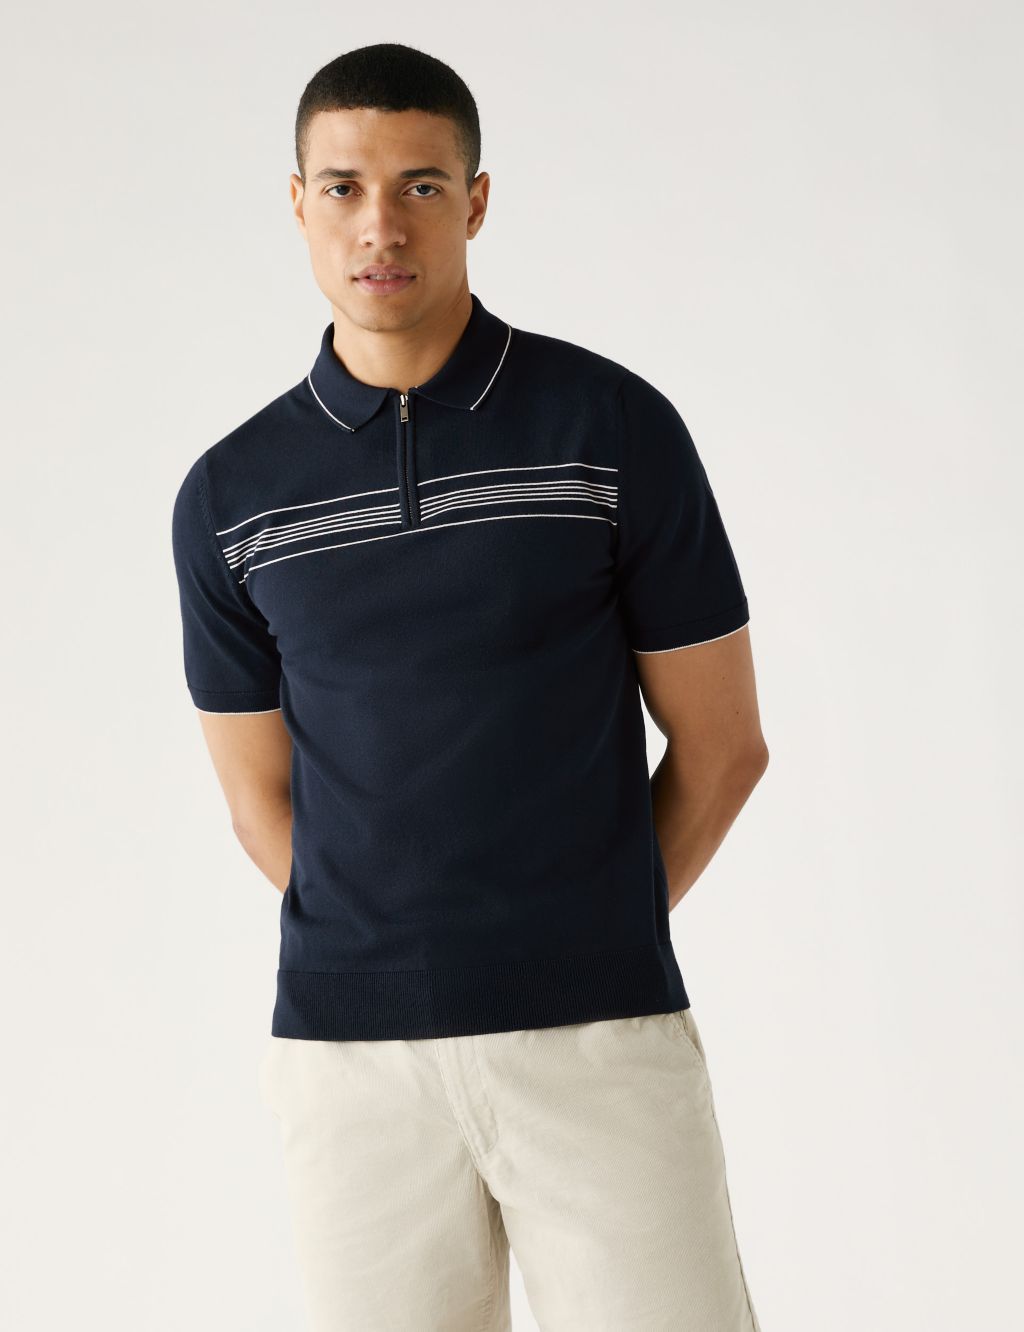 Cotton Modal Chest Stripe Knitted Polo Shirt image 3